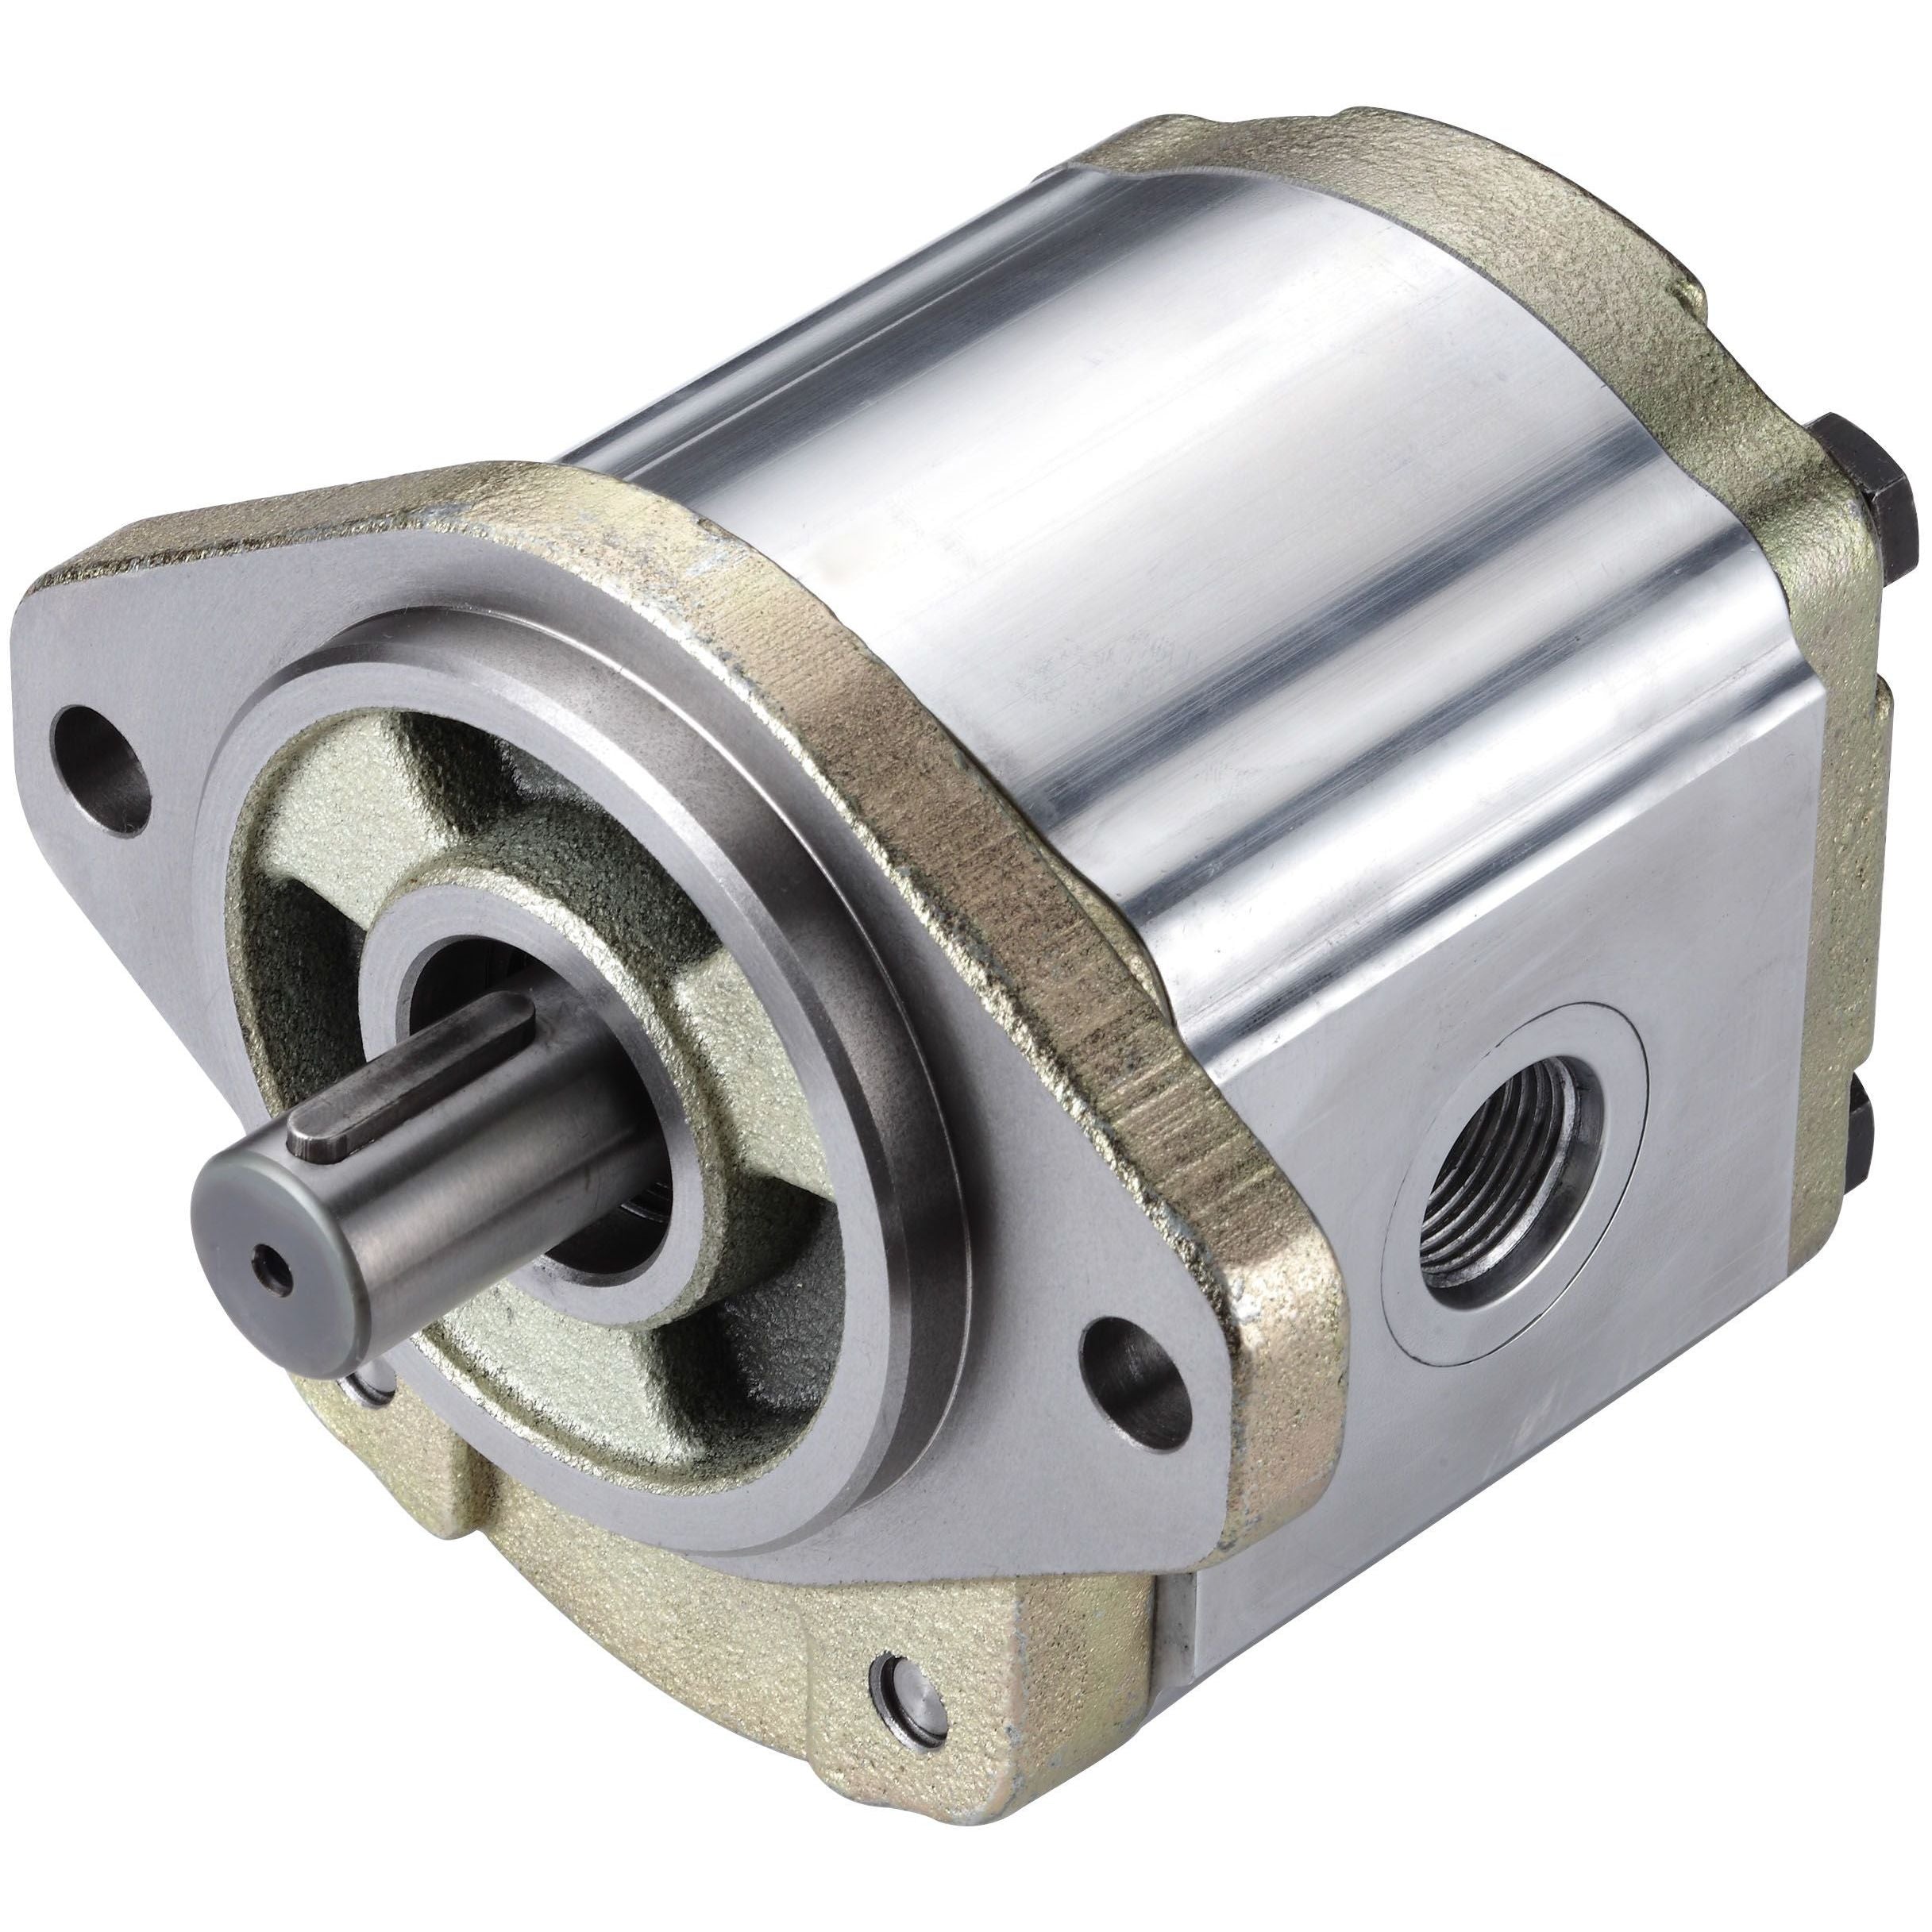 3GB8ZU244R : Honor Gear Pump, CW Rotation, 44cc (2.69in3), 20.92 GPM, 3100psi, 2500 RPM, #20 SAE (1.25") In, #12 SAE (3/4") Out, Splined Shaft 13-Tooth, 16/32 Pitch, SAE B 2-Bolt Mount